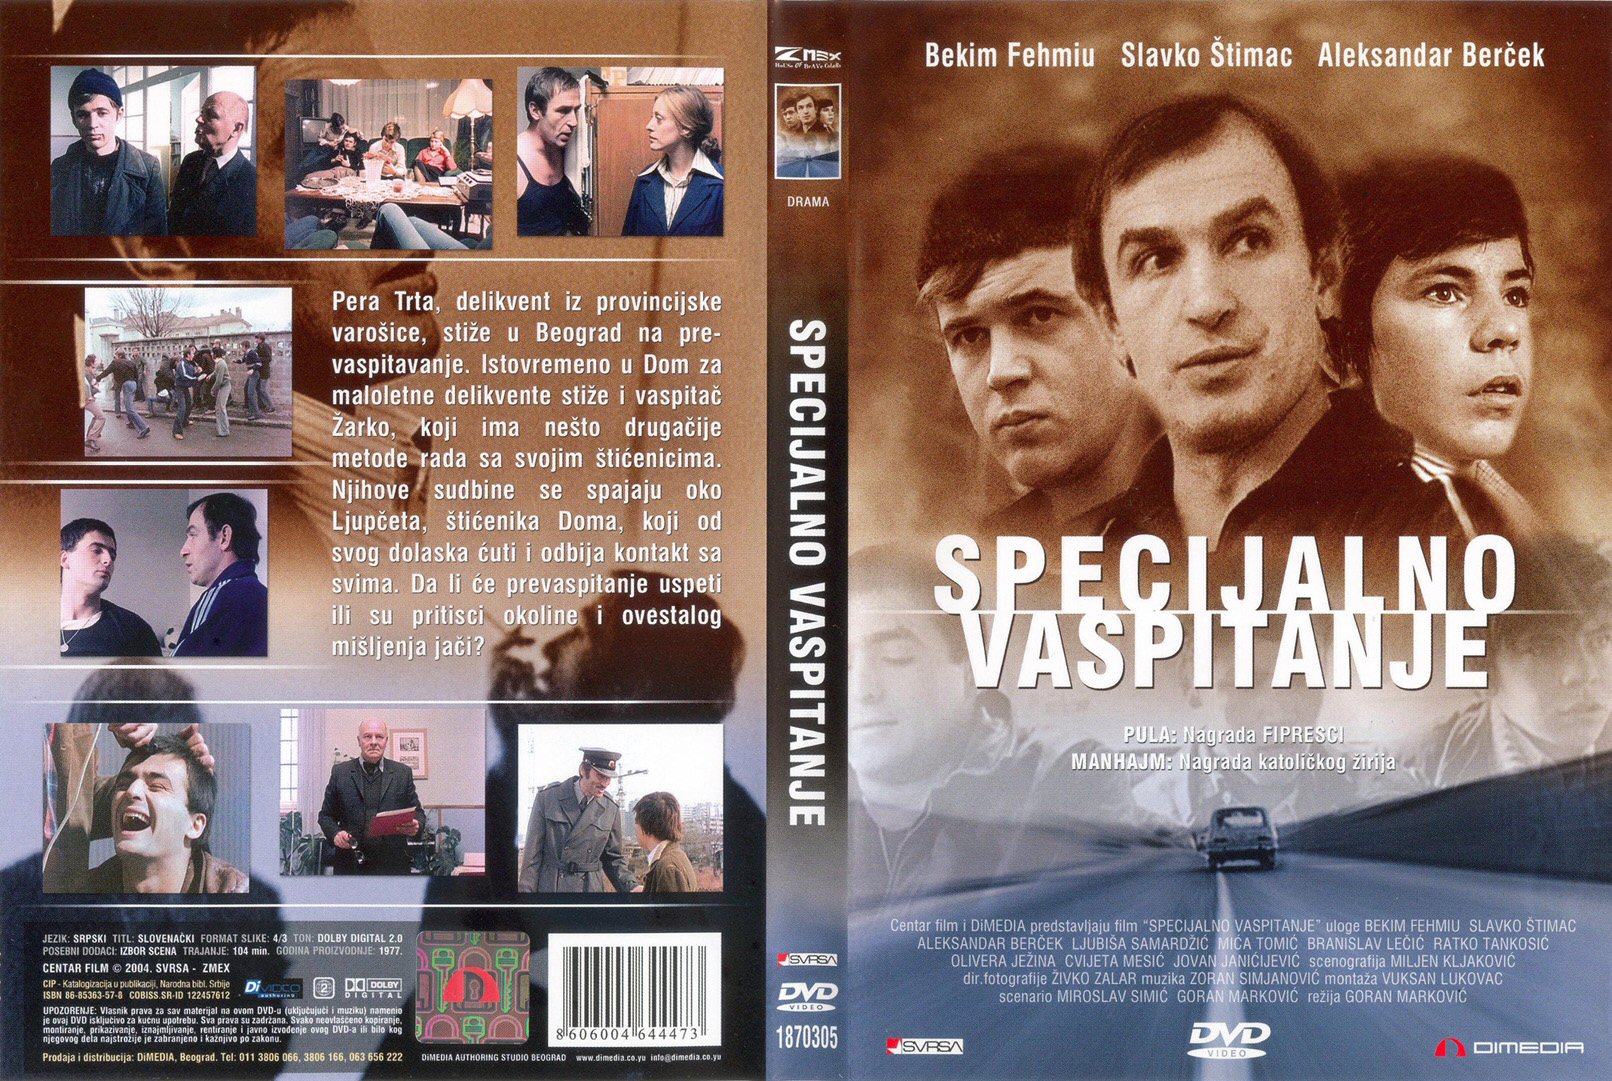 Click to view full size image -  DVD Cover - S - specijalno_vaspitanje_dvd - specijalno_vaspitanje_dvd.jpg